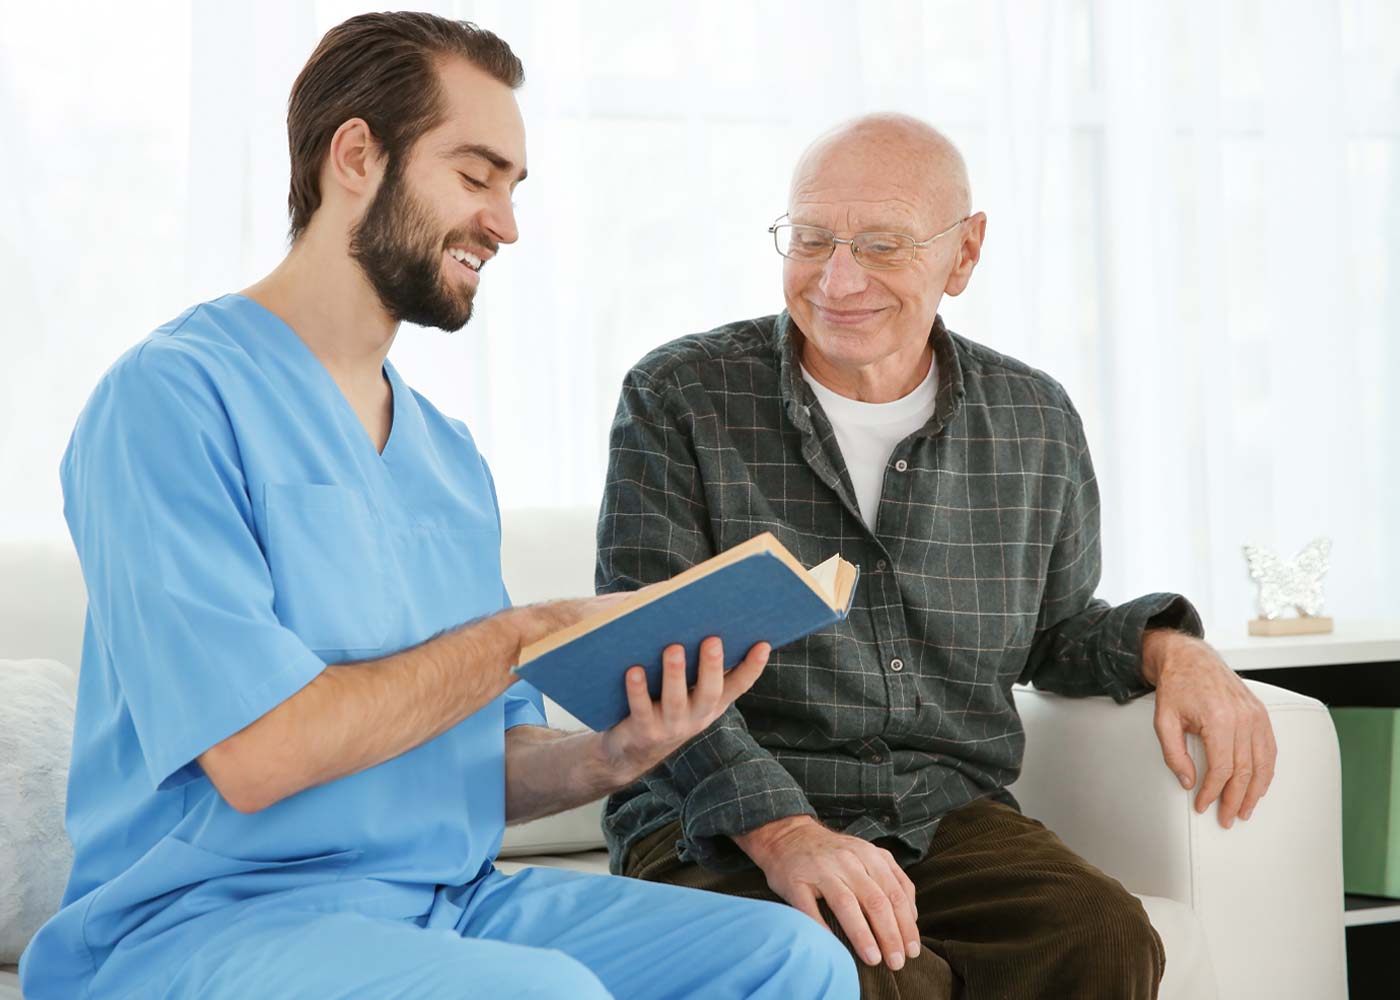 Male caregiver reading book to older man, sitting on couch